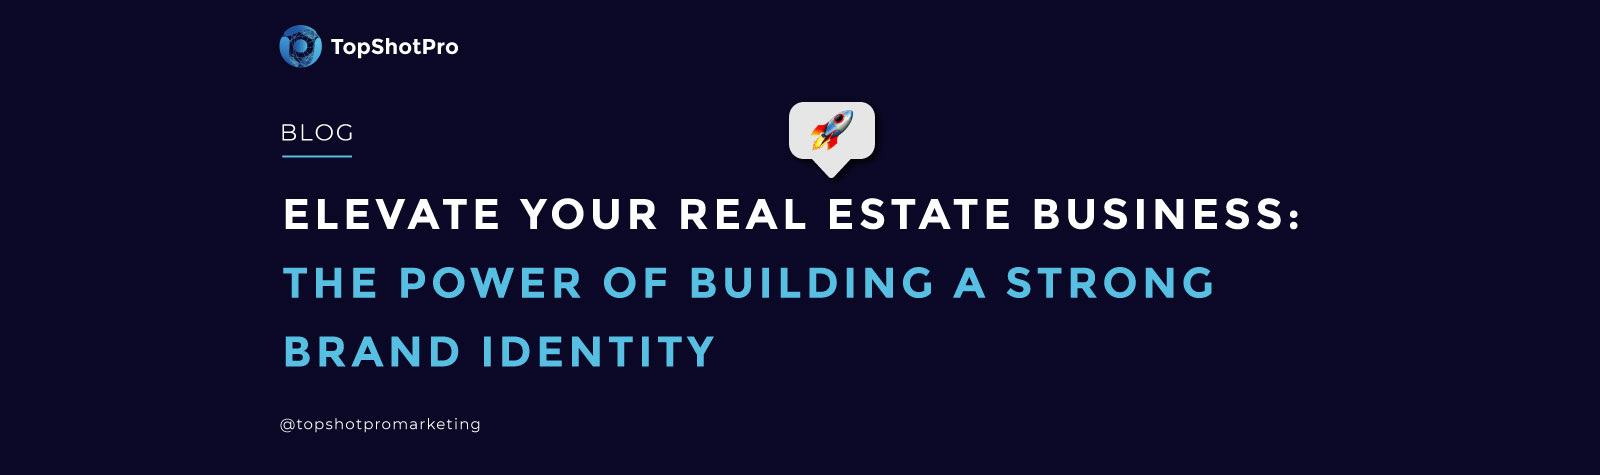 Building a Strong Brand Identity in Real Estate: What Is It & Why It Matters